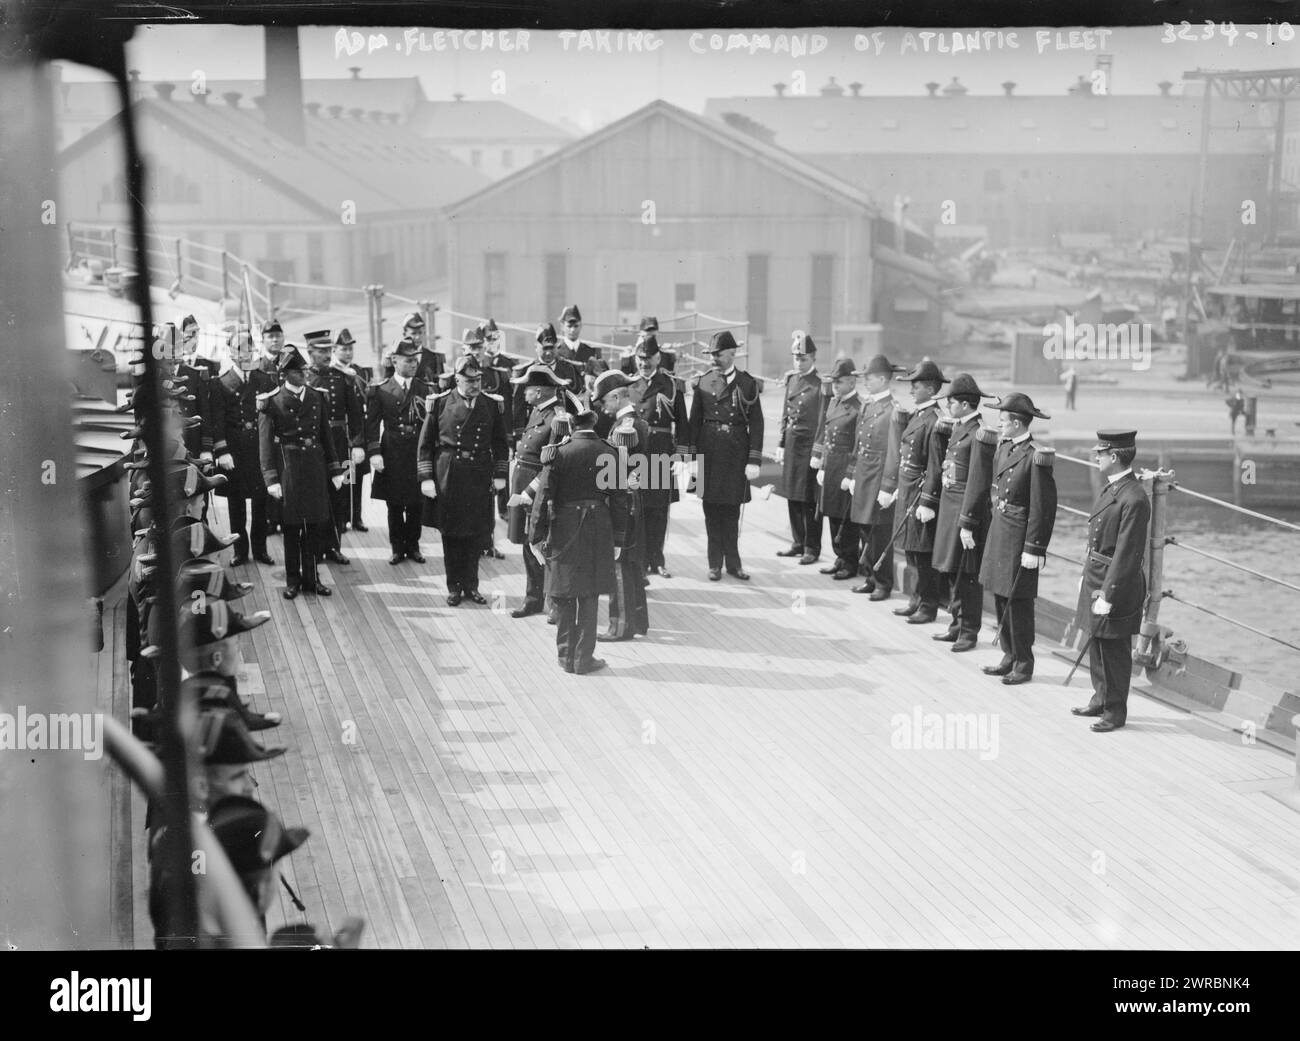 Adm. Fletcher taking command of Atlantic Fleet, Photograph shows the change of command ceremony aboard USS Wyoming (BB-32) at the Brooklyn Navy Yard (New York Naval Shipyard) as Admiral Frank Friday Fletcher (1855-1928) took command of the Atlantic Fleet on September 16, 1914., 1914 Sept., Glass negatives, 1 negative: glass Stock Photo